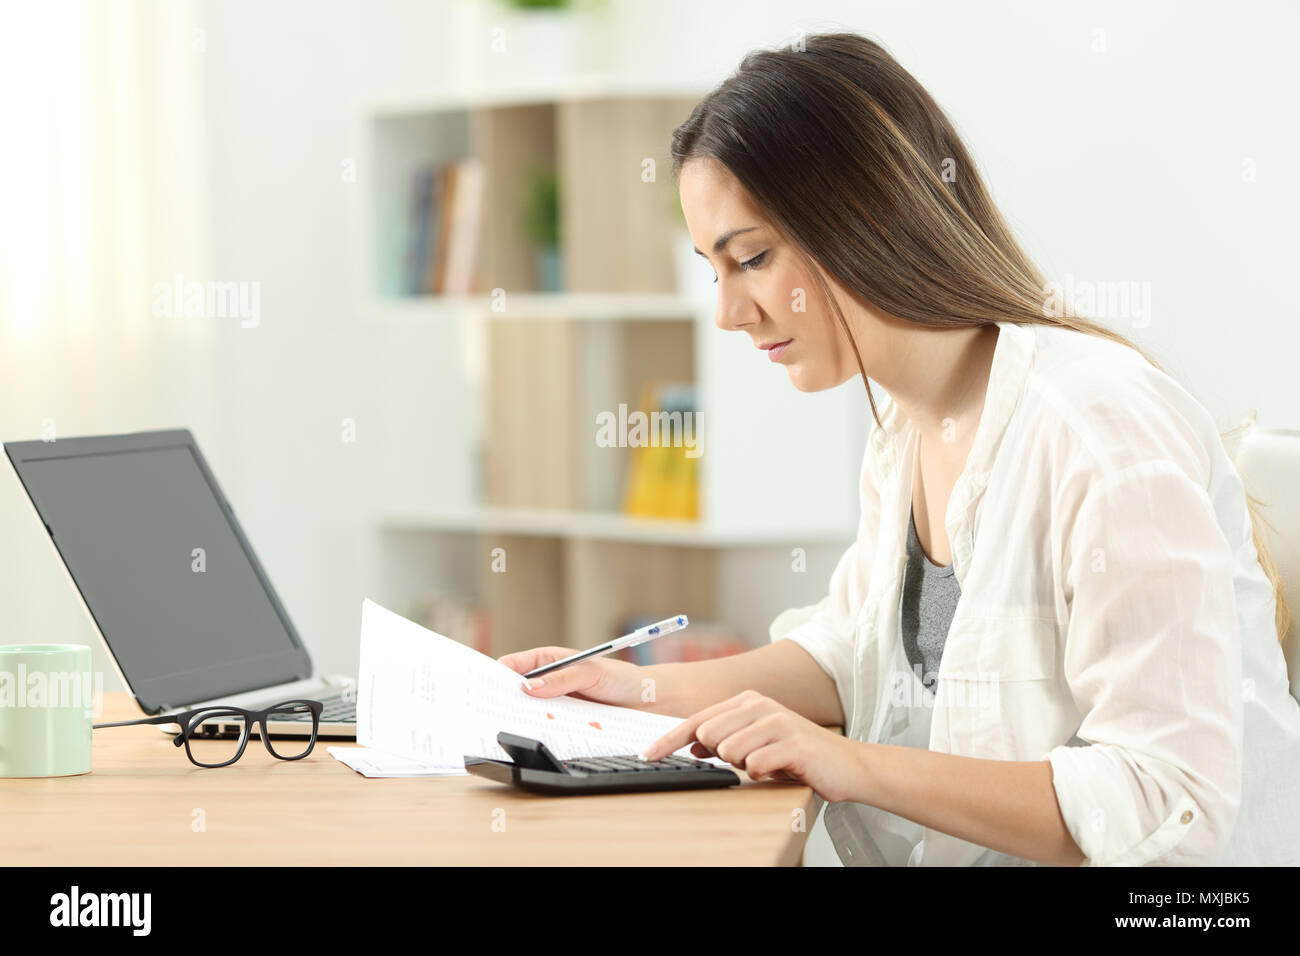 Side view portrait of a serious woman doing domestic accounting at home Stock Photo